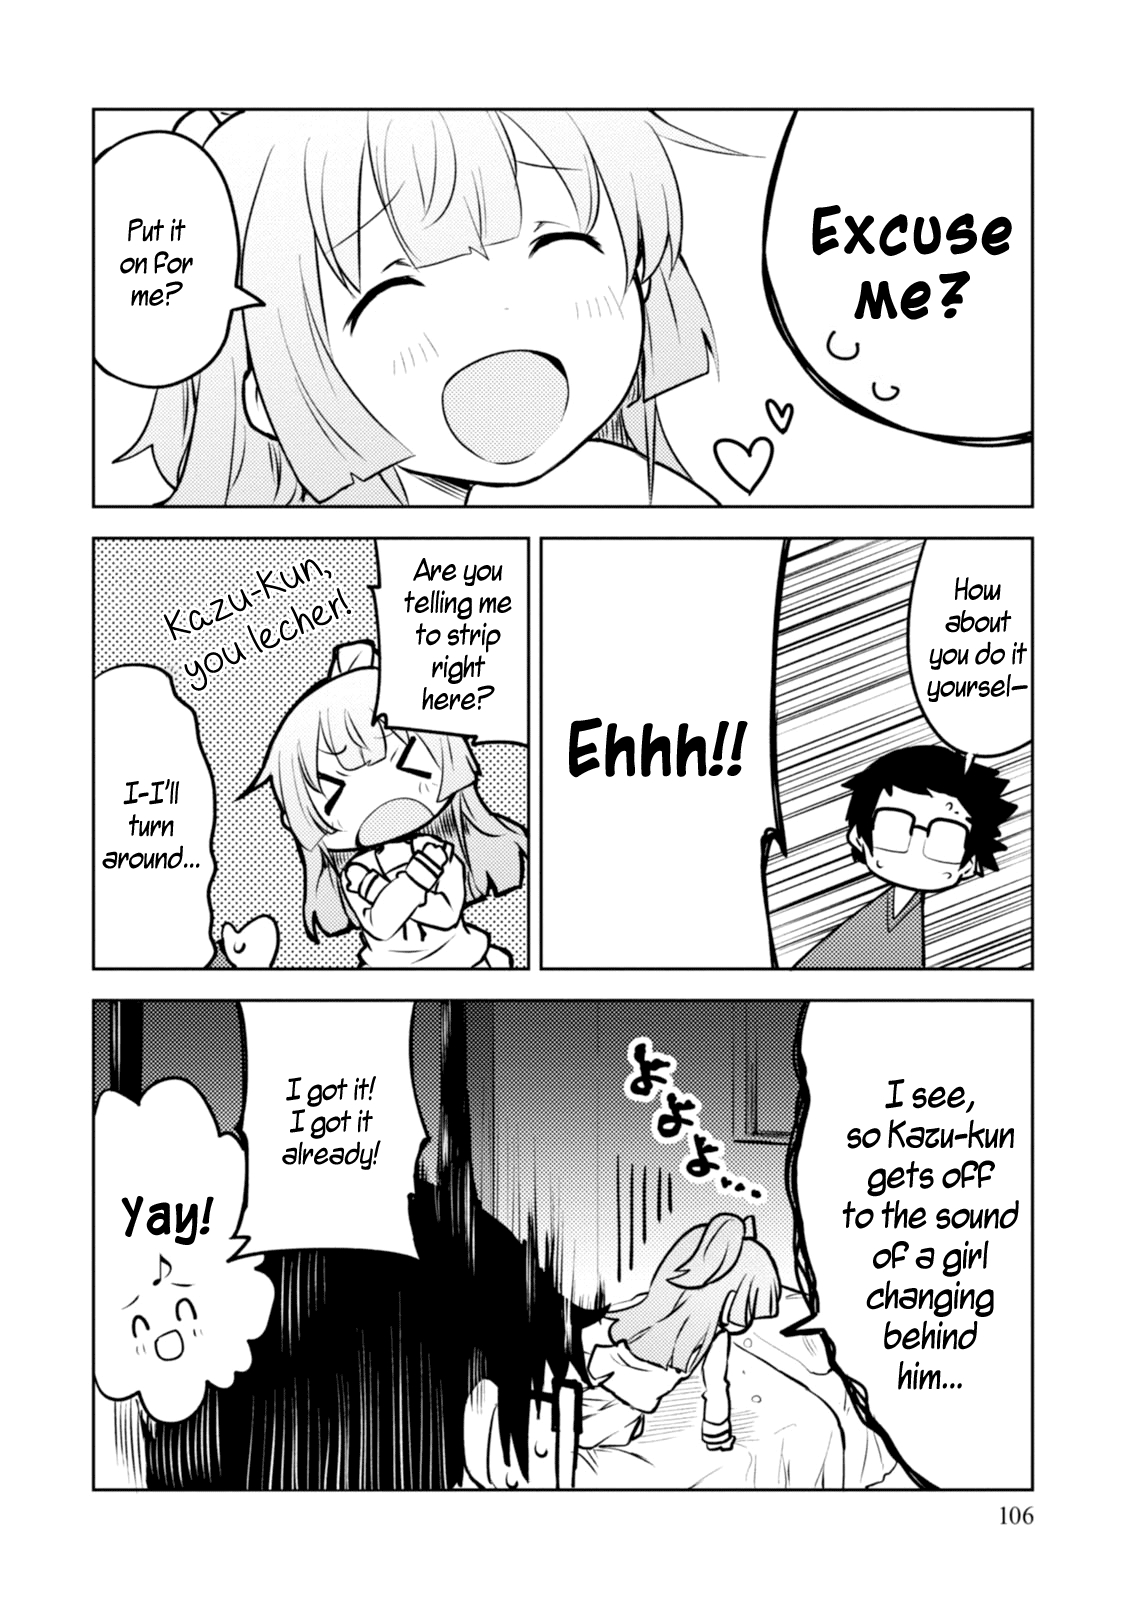 I Can't Marry A Hugging Pillow! Vol. 1 Ch. 4 Changing the Hugging Pillow?